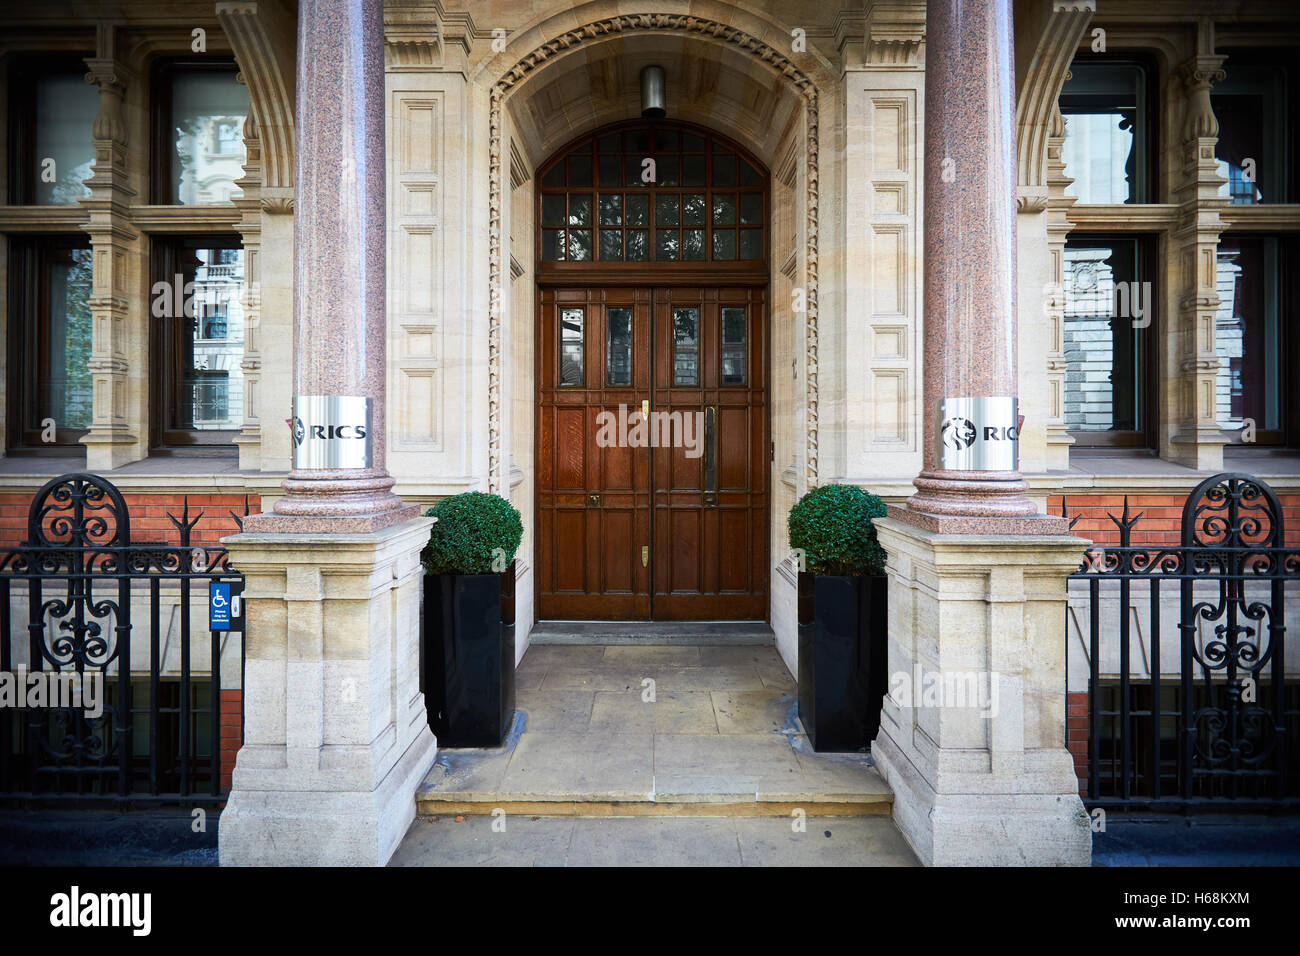 The Royal Institution of Chartered Surveyors (RICS) Headquarters on Parliament Square in London Stock Photo